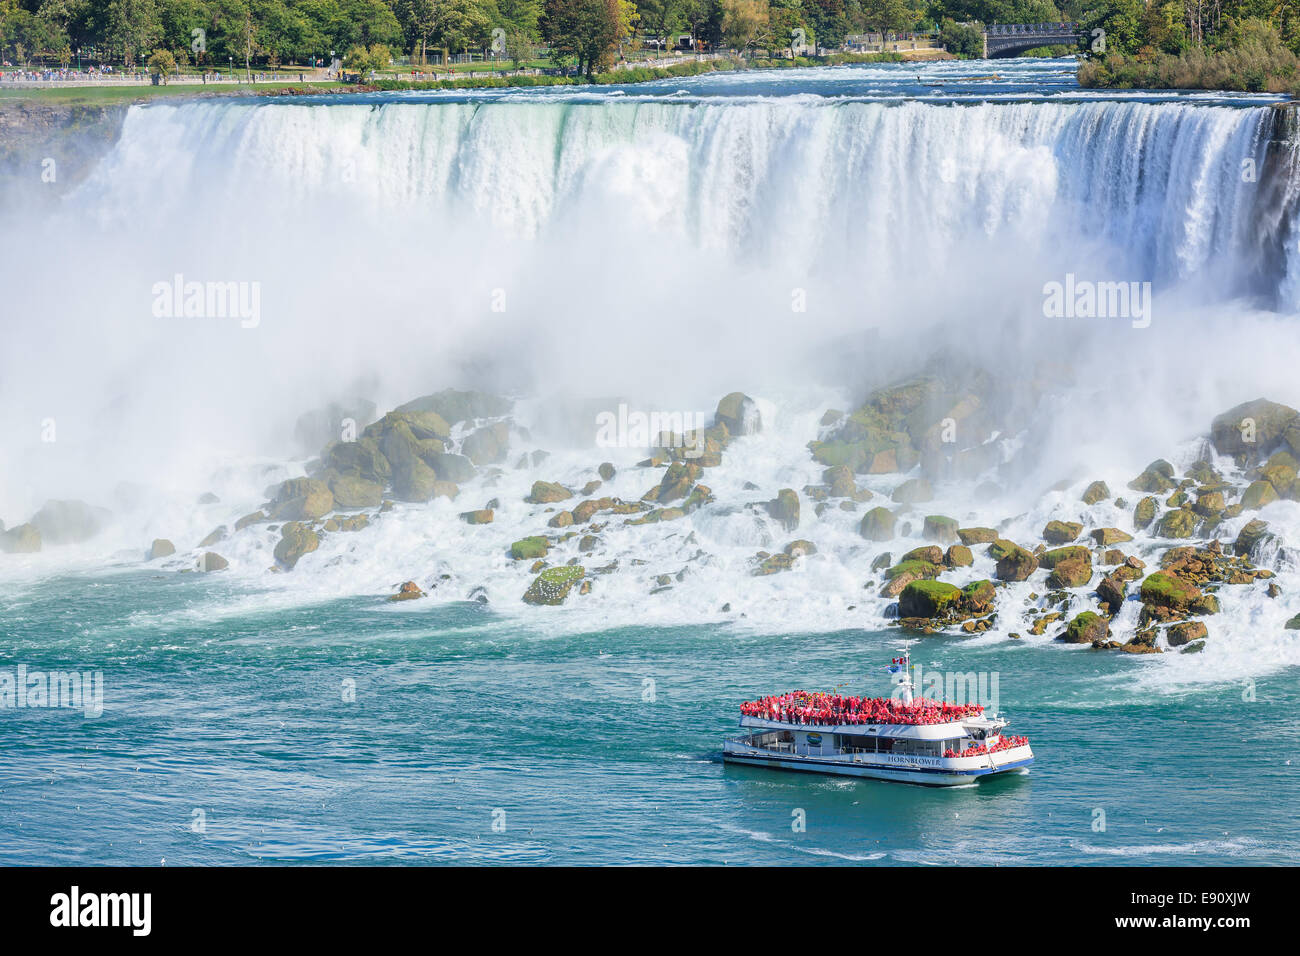 The Hornblower loaded with tourists in front of the American Falls, part of the Niagara Falls, Ontario, Canada. Stock Photo